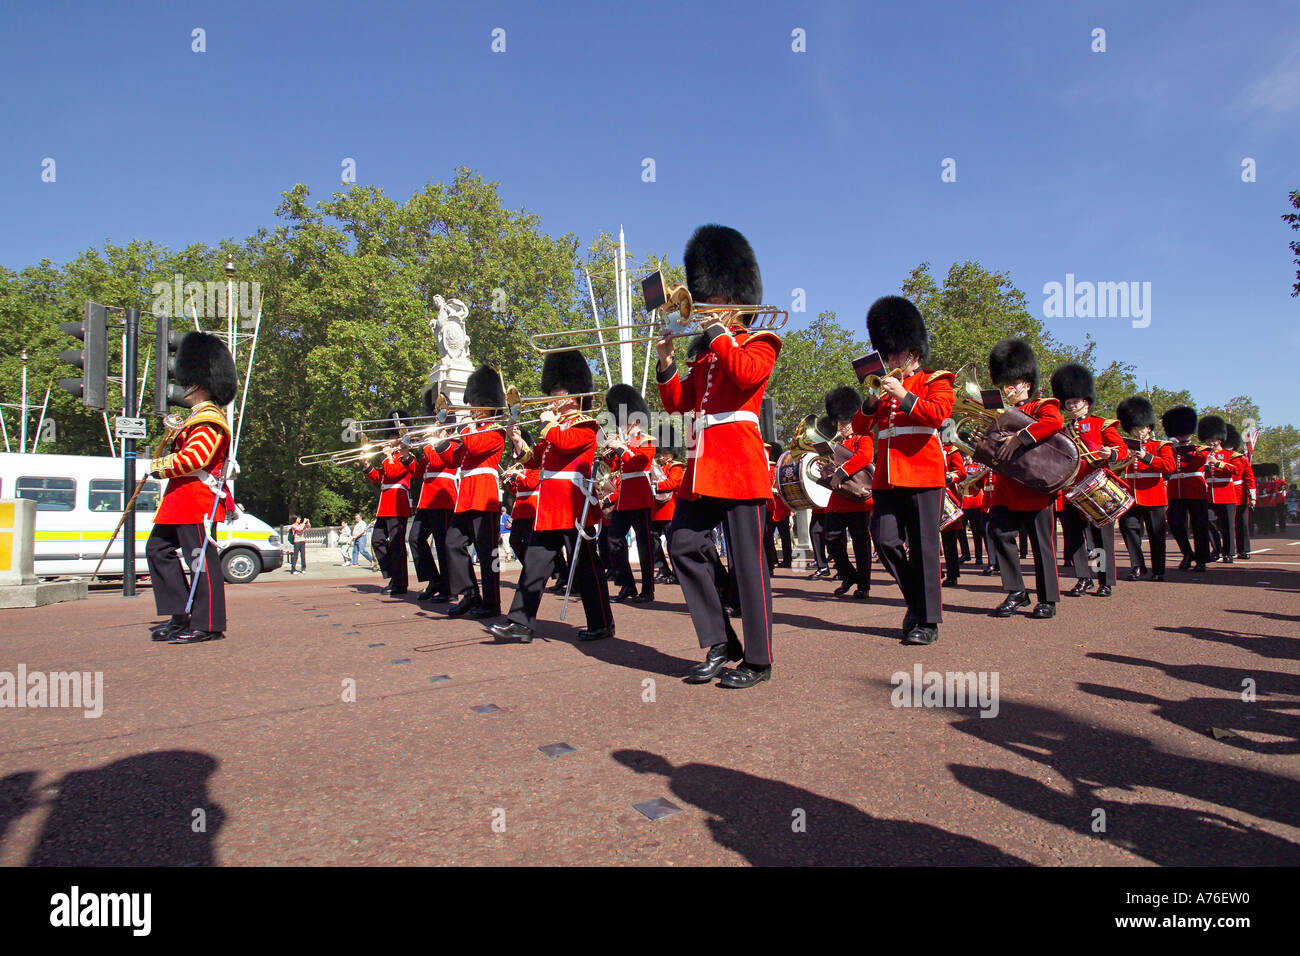 Wide angle view of the rows of Coldstream Guards band in formation playing instruments at the Changing of the Guard ceremony in Stock Photo